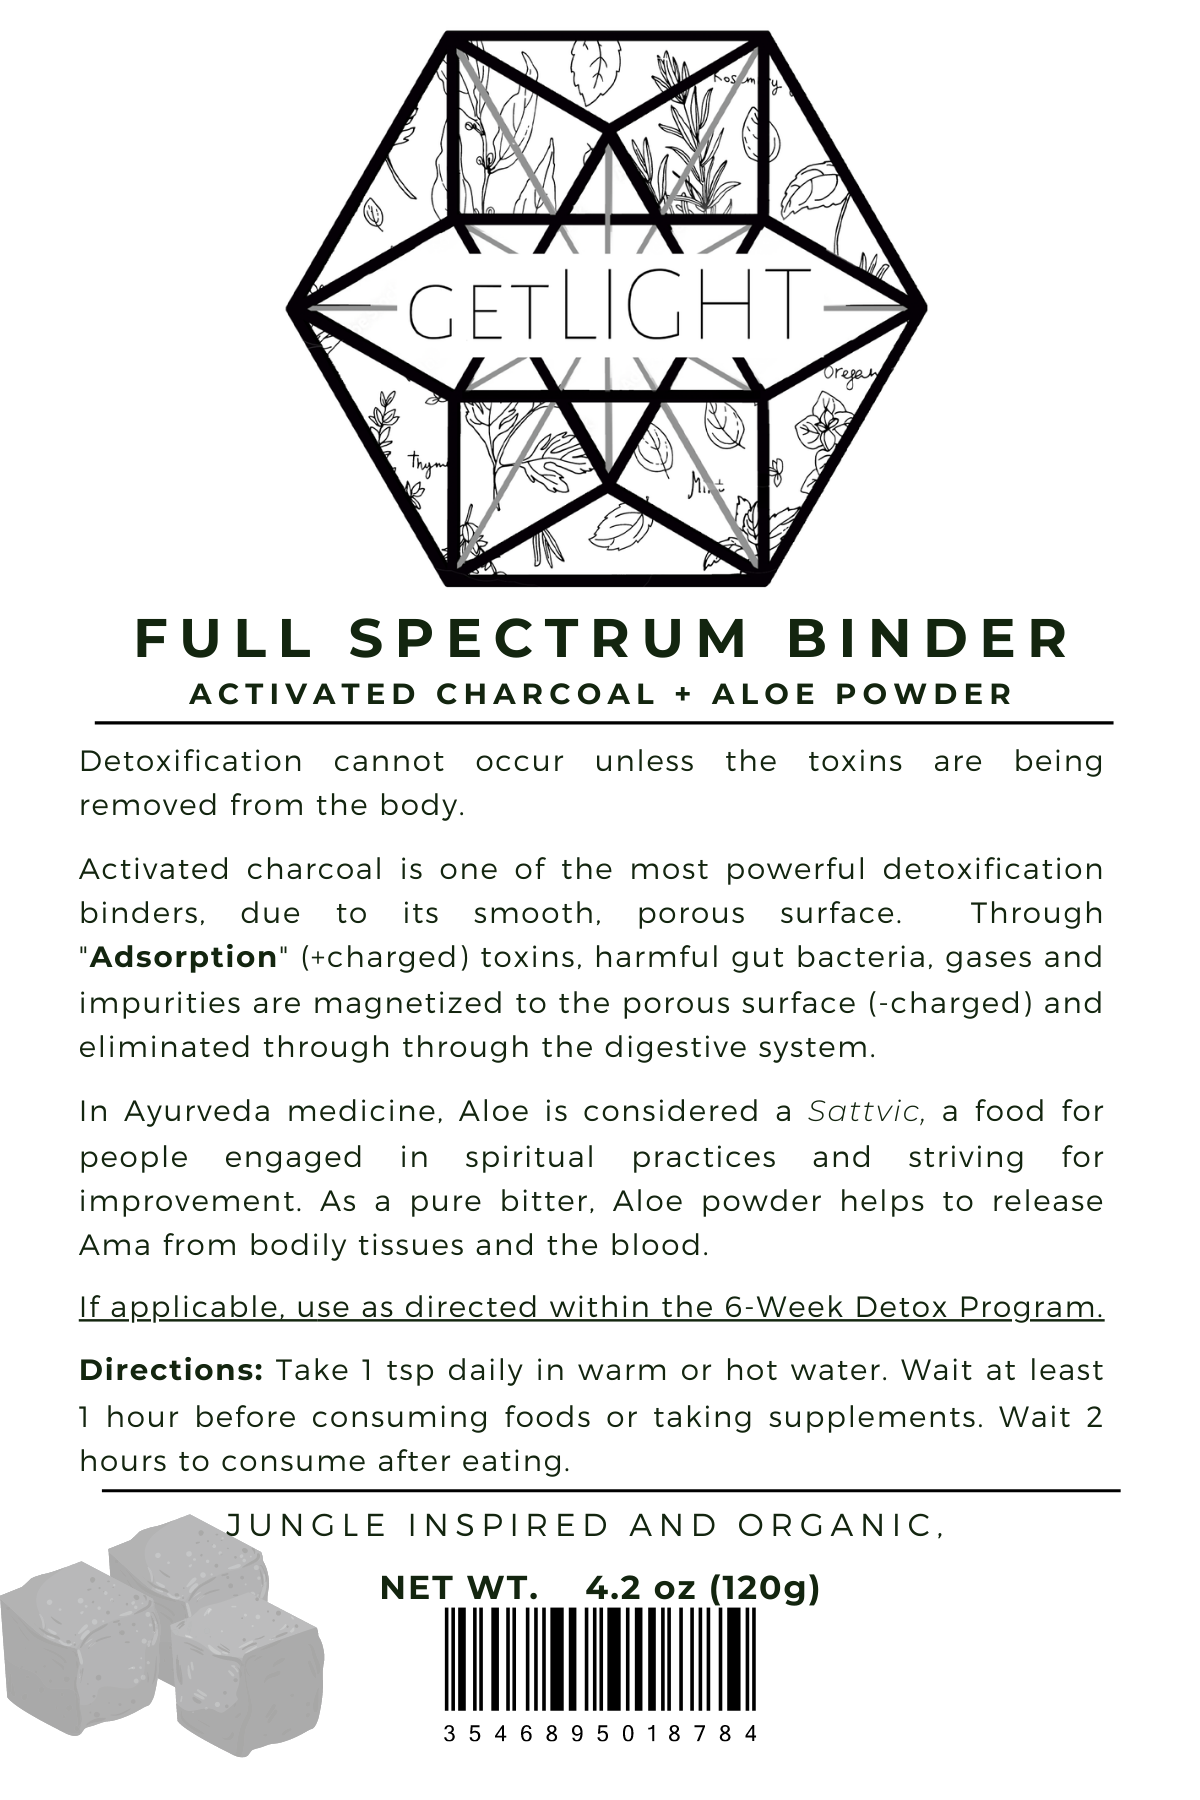 Full Spectrum Binder (Activated Charcoal)